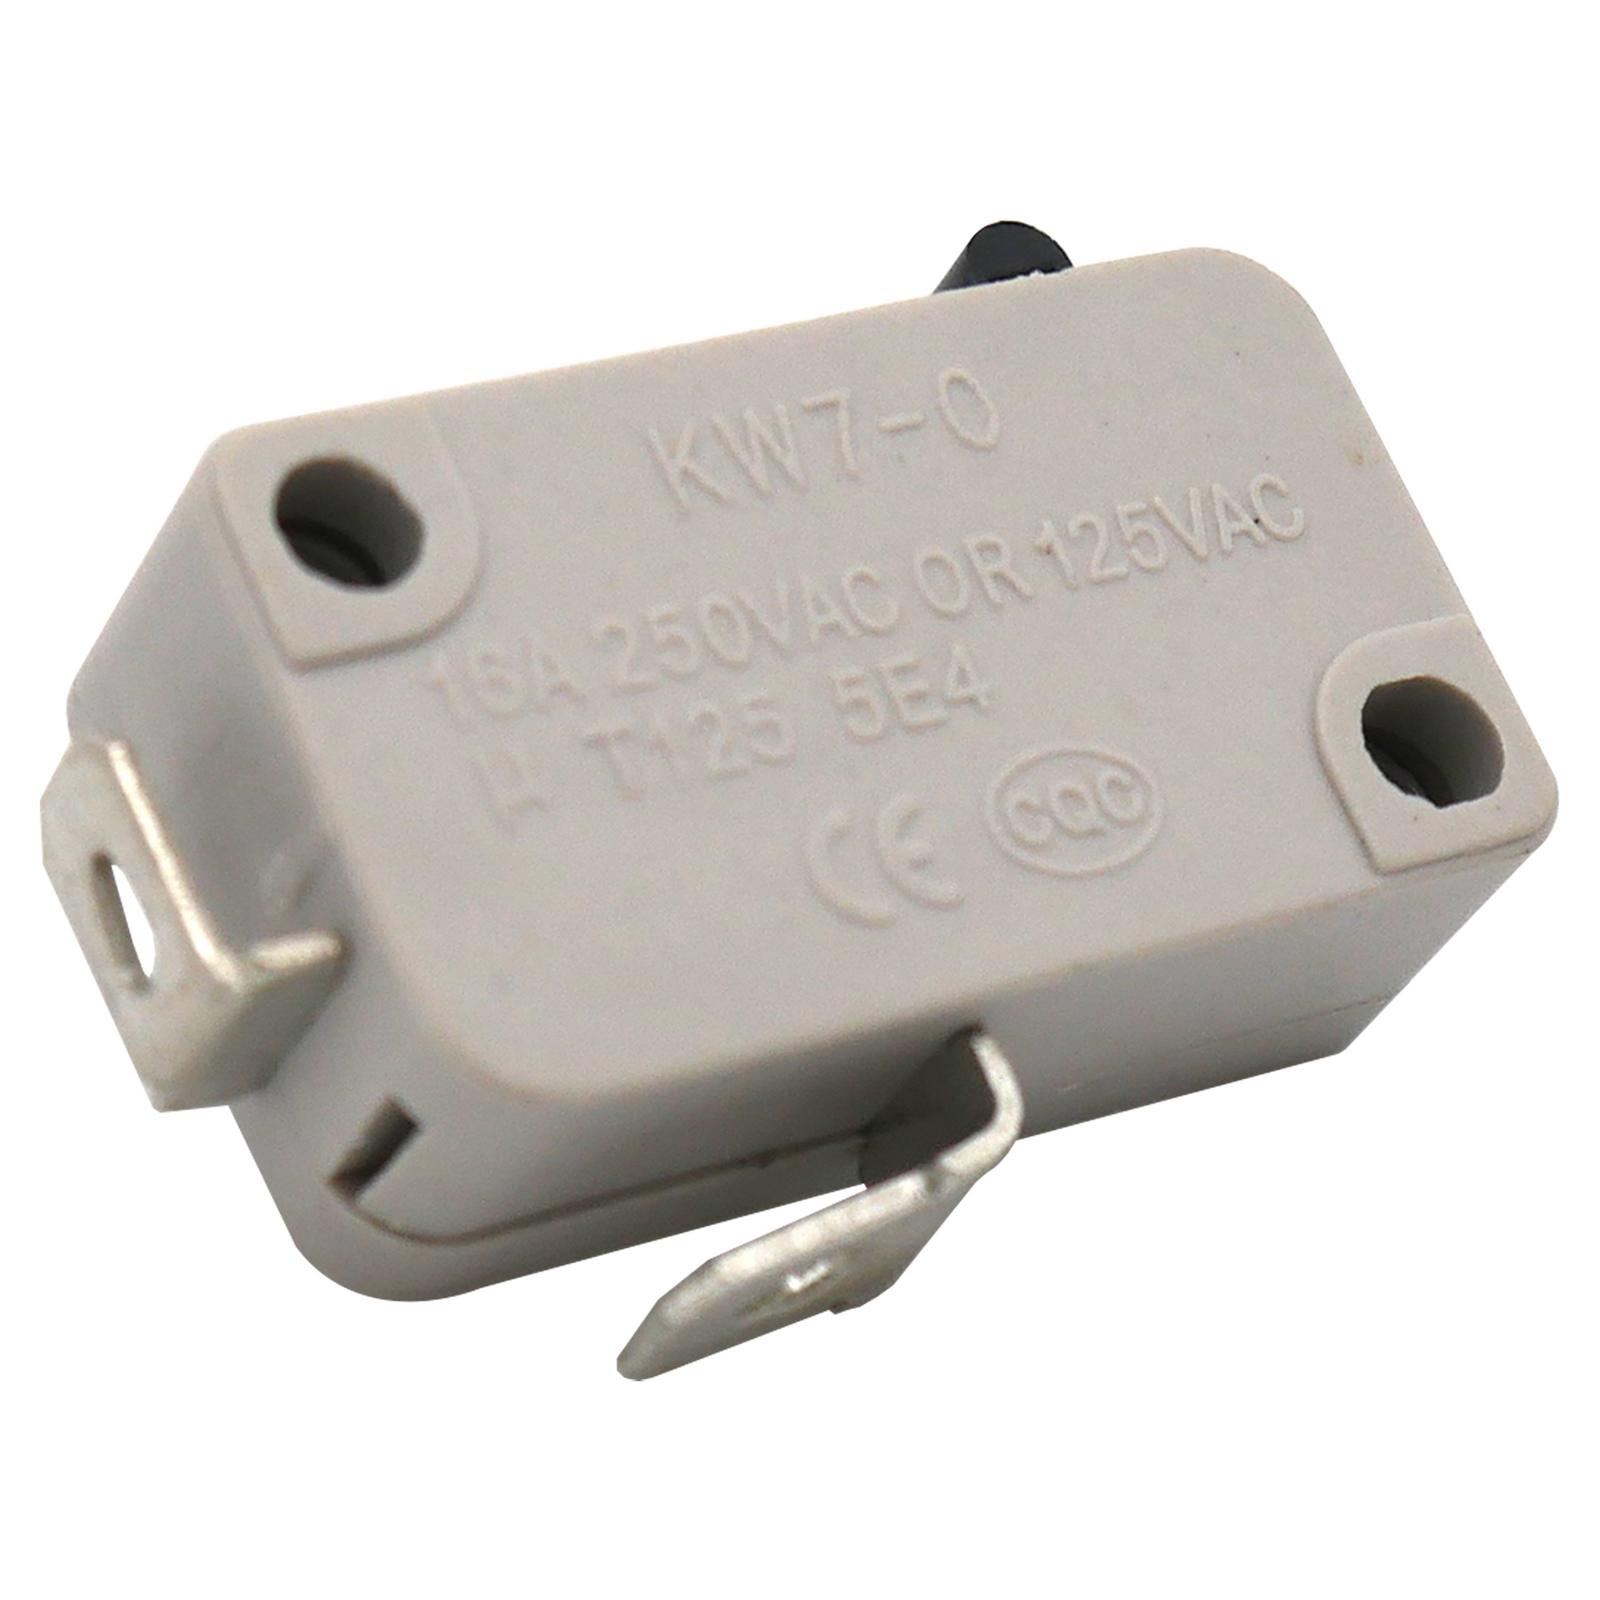 Micro switch for machines